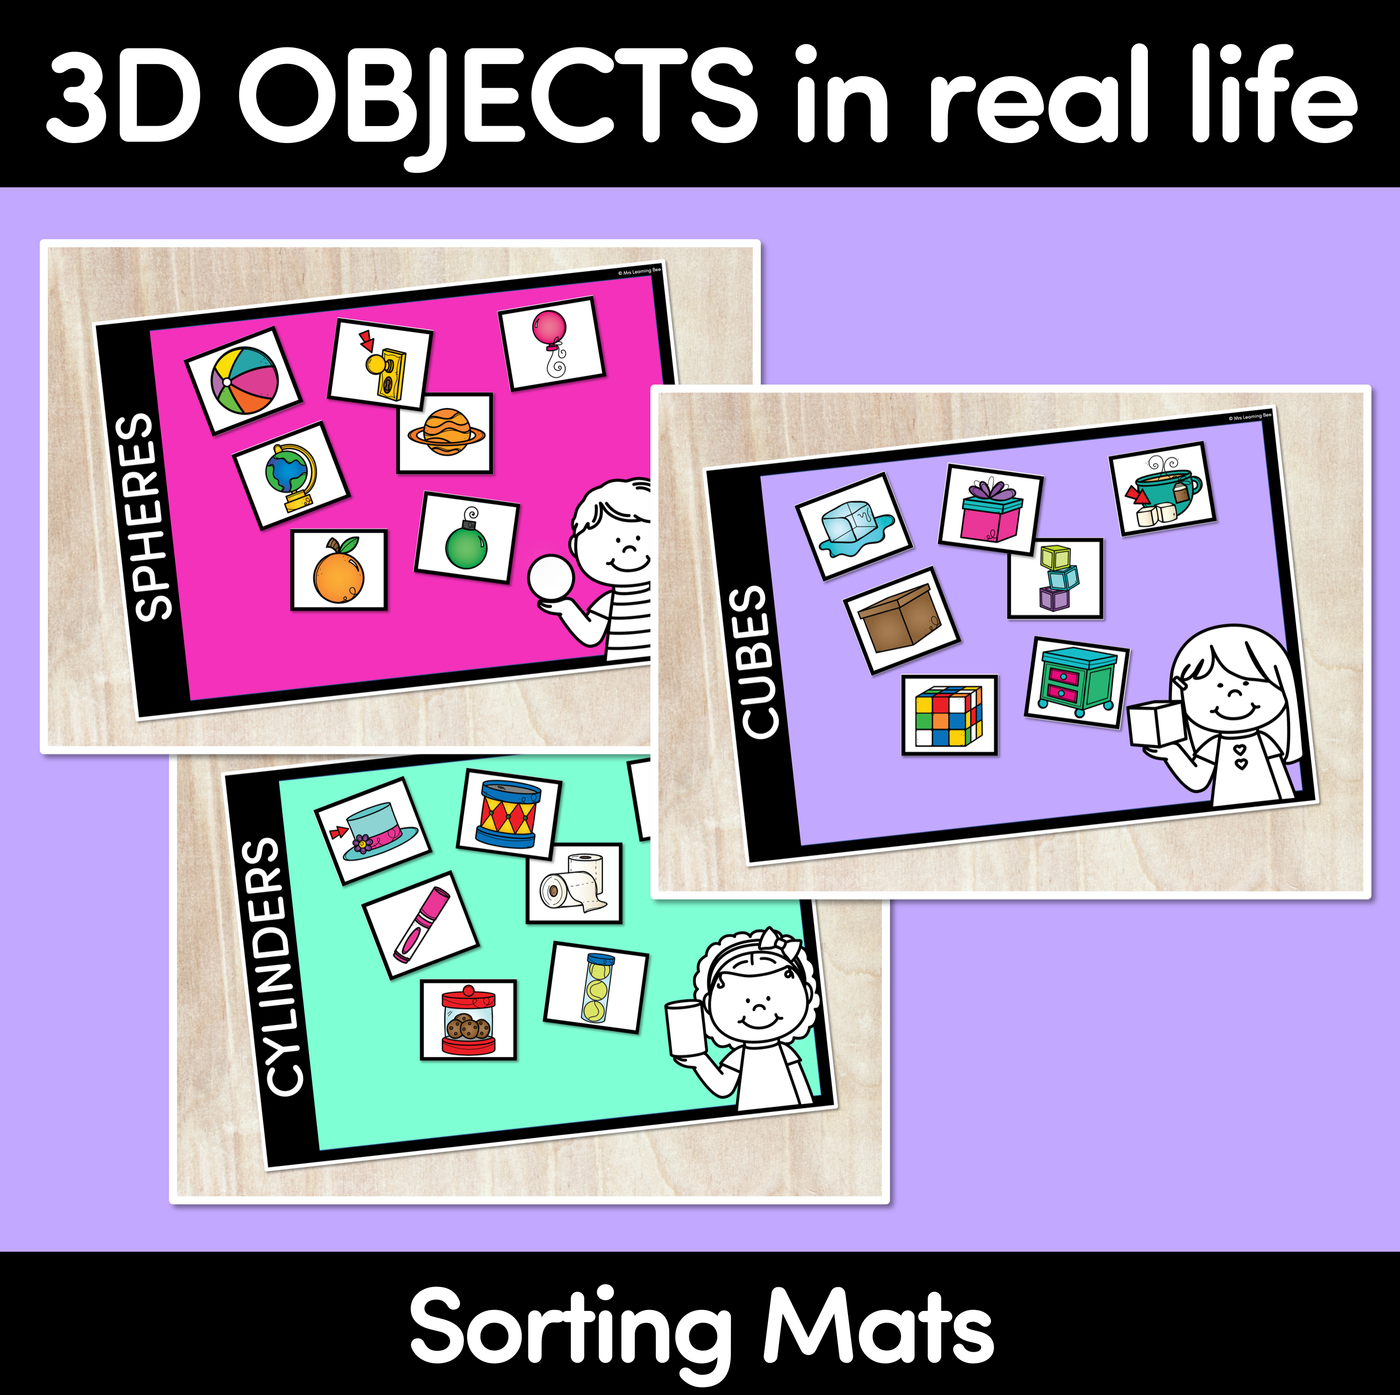 3D Objects in Real Life - Sorting Mats